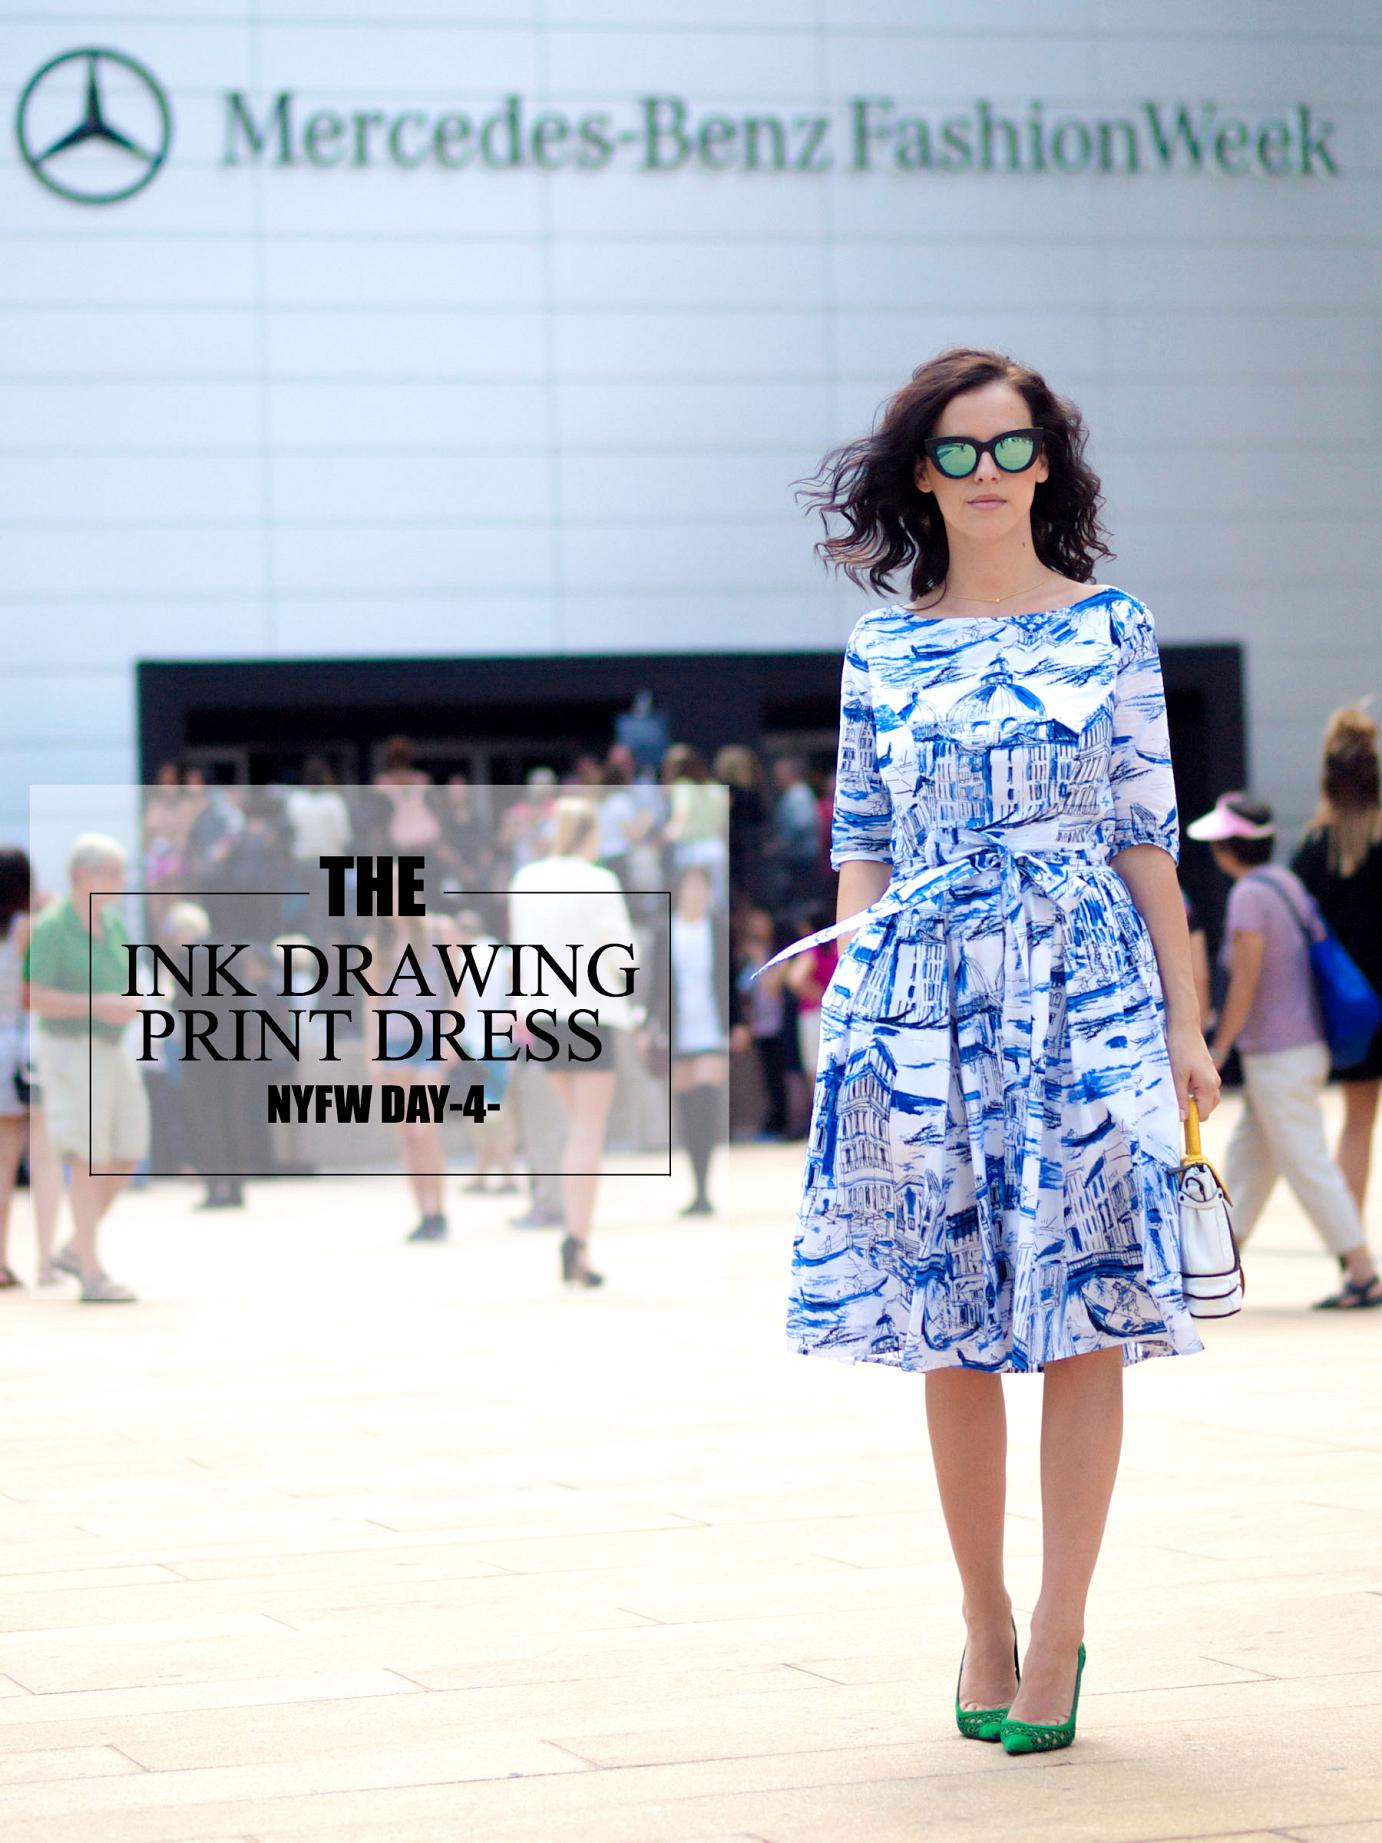 asos sunglasses, bittersweet colours, cooee jewelry, eye cat sunglasses, facine bag, green shoes, ink drawing print dress, lincoln Center nyfw, mirrored sunglasses, New York, nyfw september 2014, nyfw street style, pierre hardy shoes, printed dress,